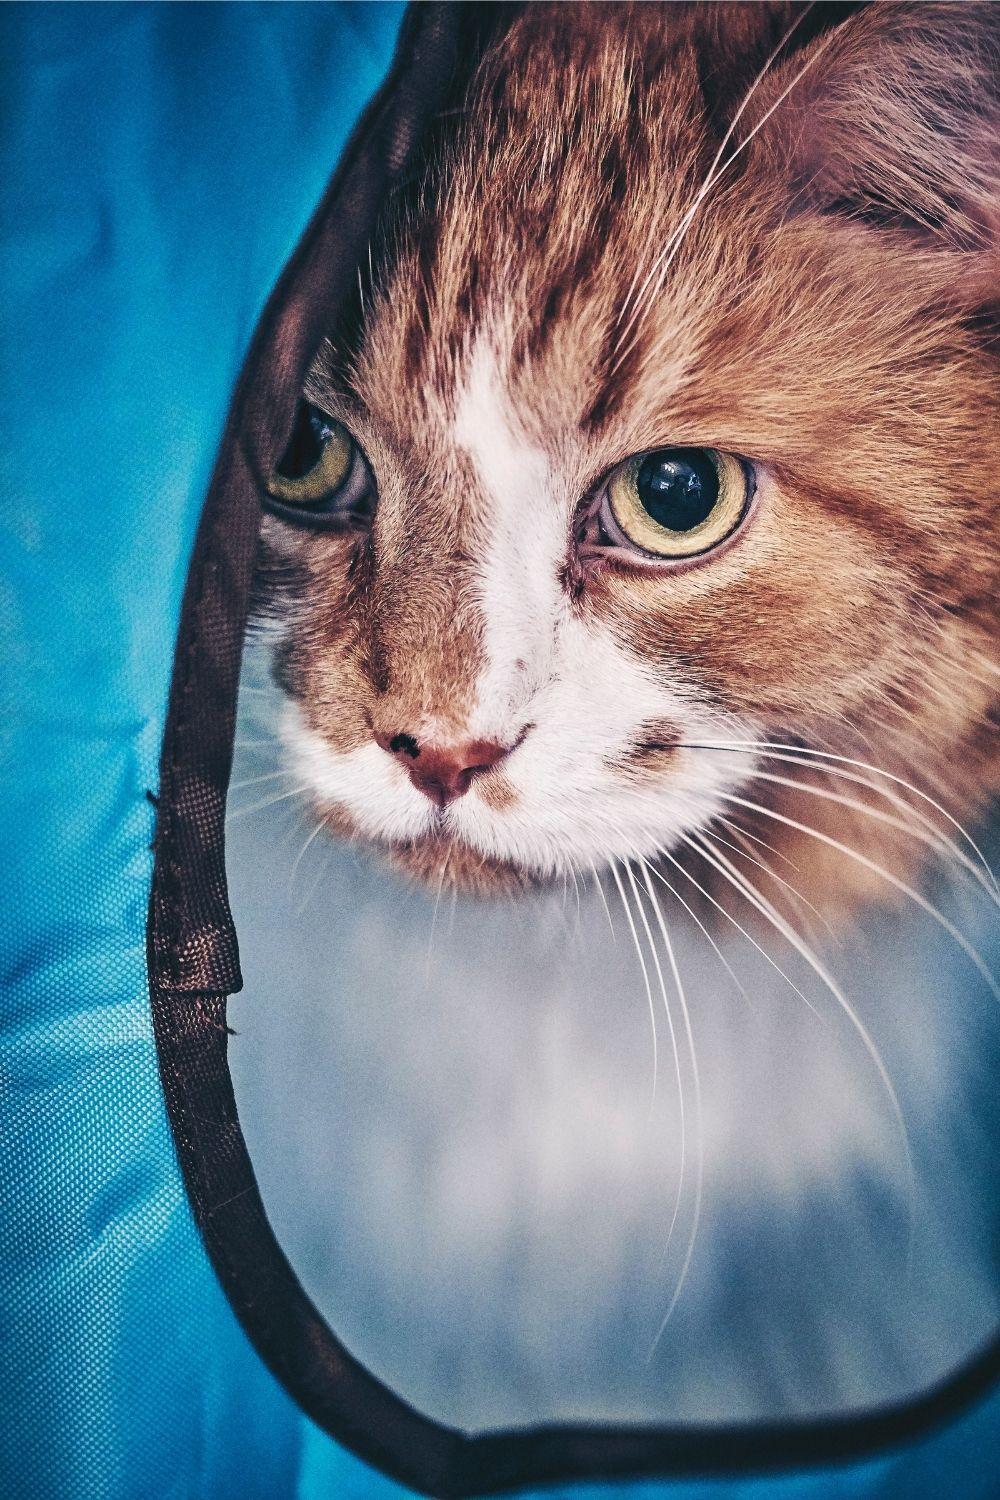 A cat avoiding people by hiding in a pop-up tent.